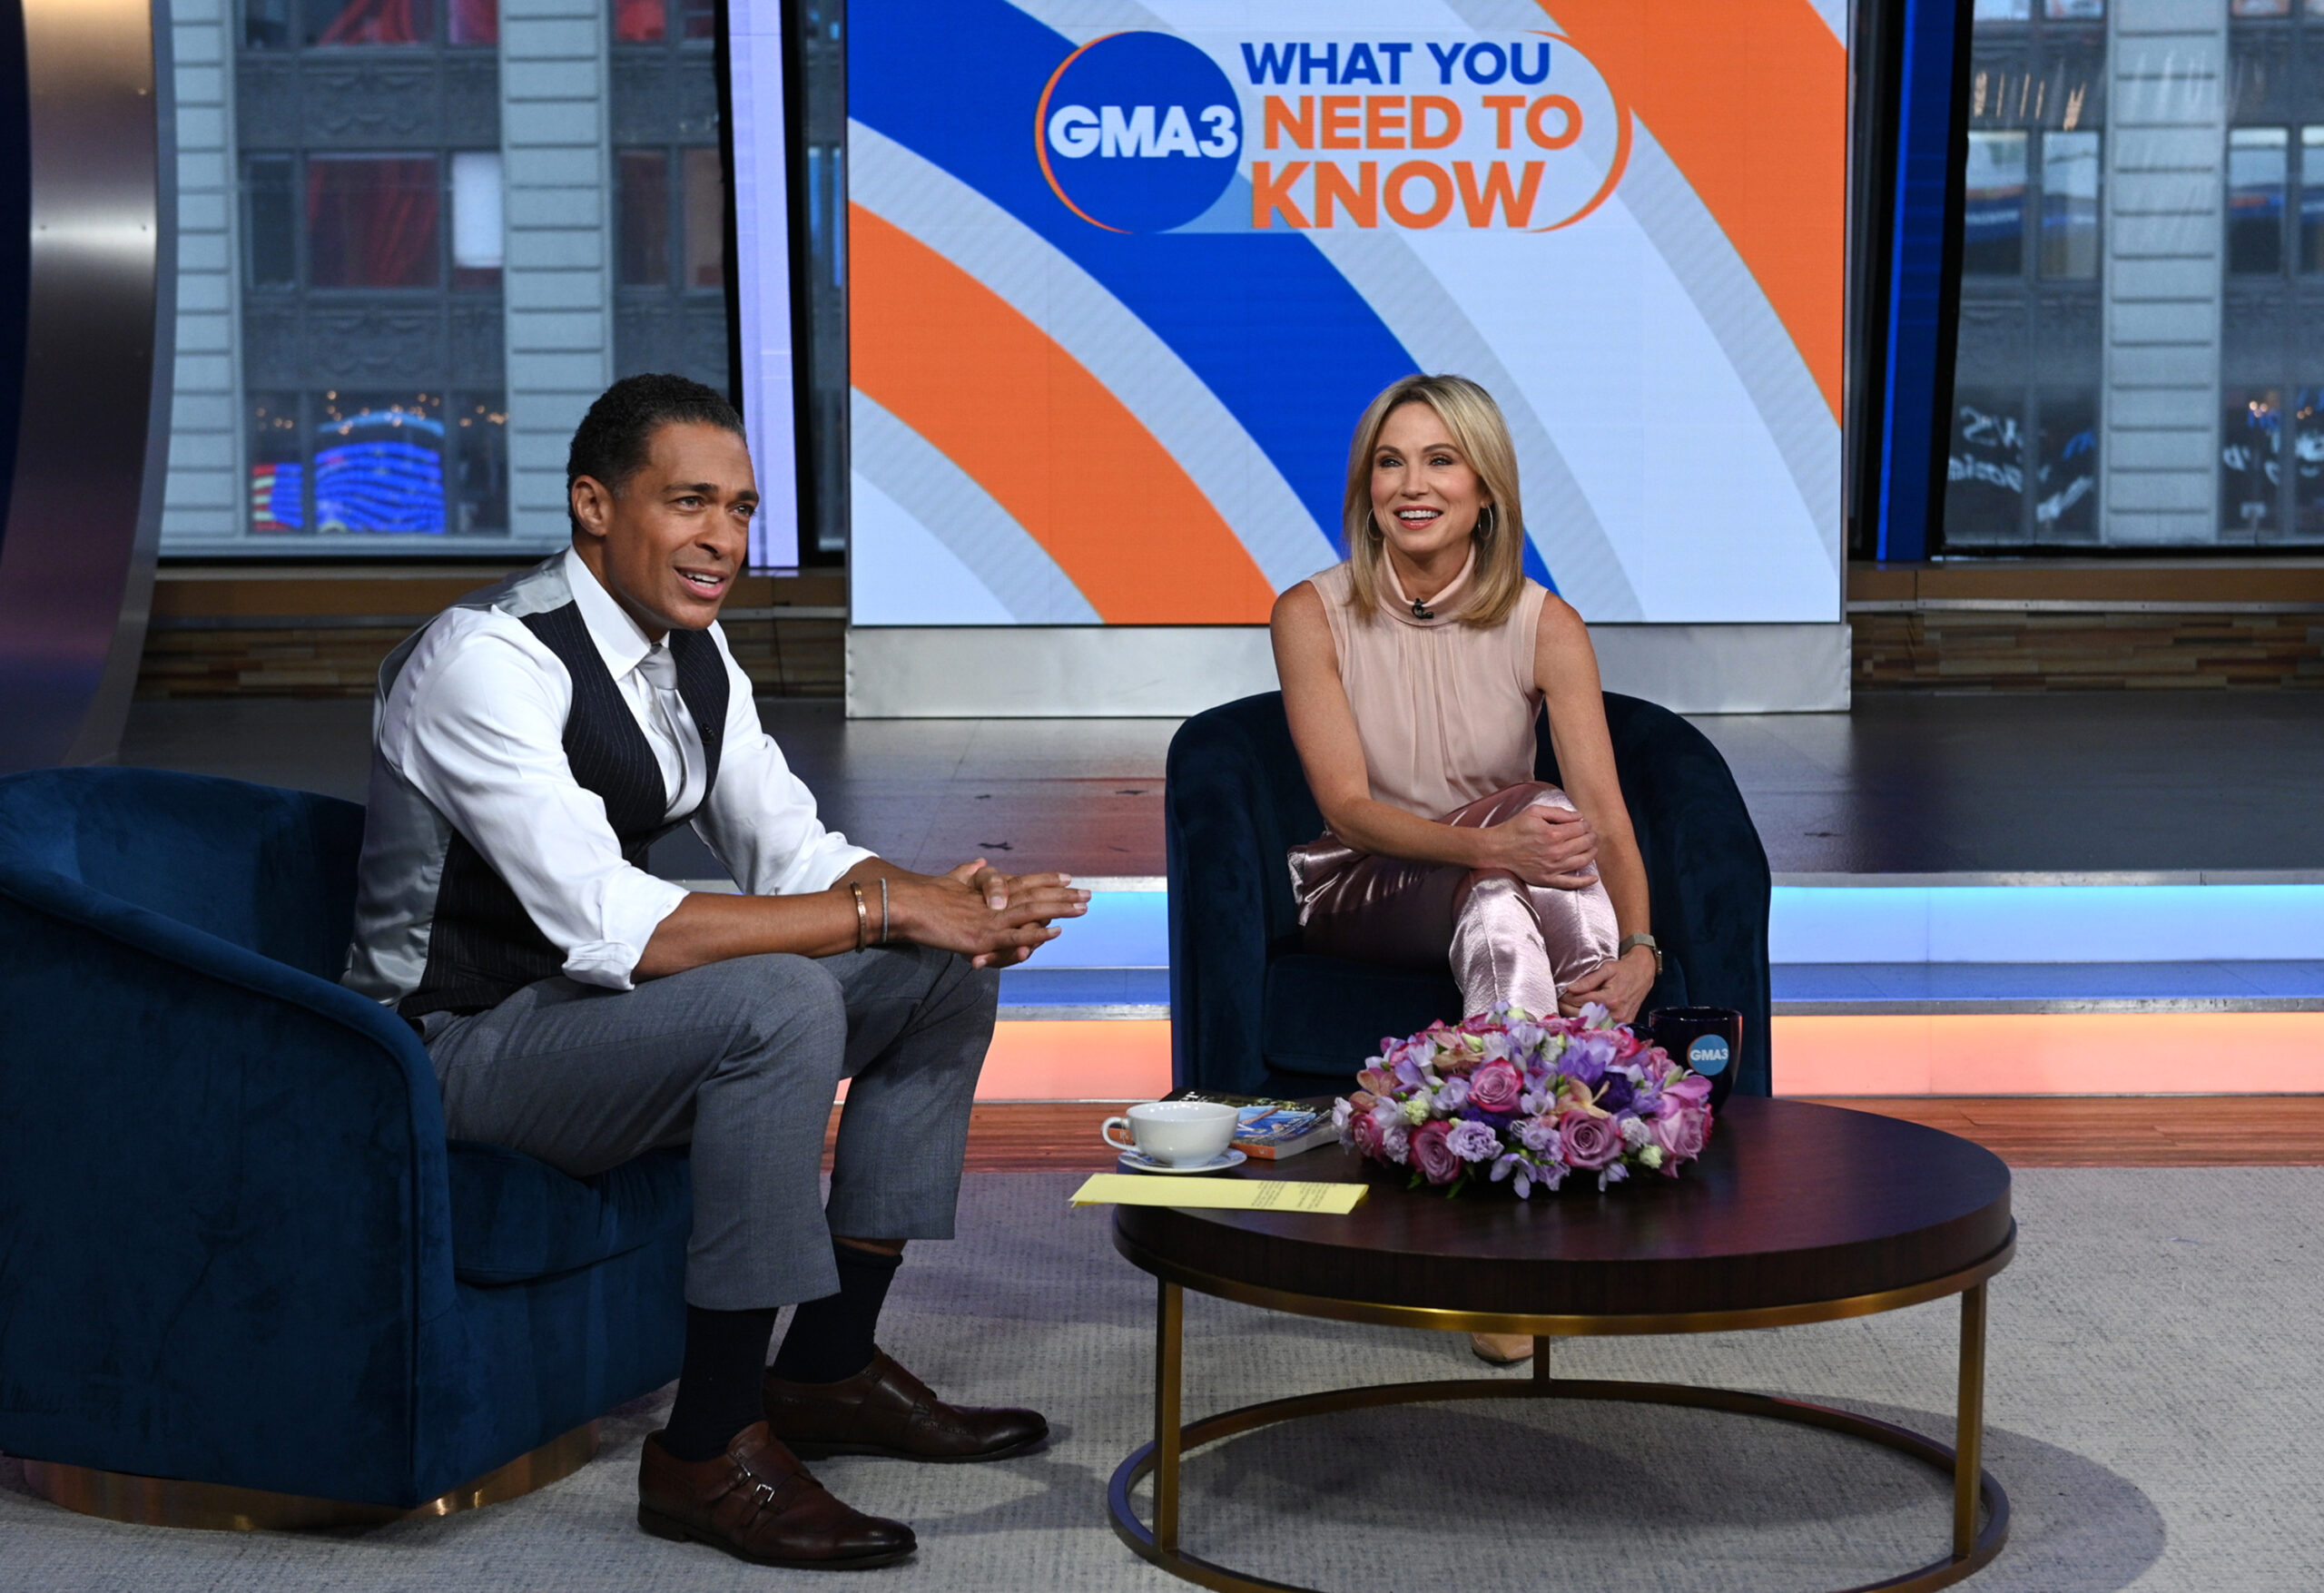 ‘GMA3’ Hosts T.J. Holmes and Amy Robach Embroiled in a Scandal After Seen Getting Handsy